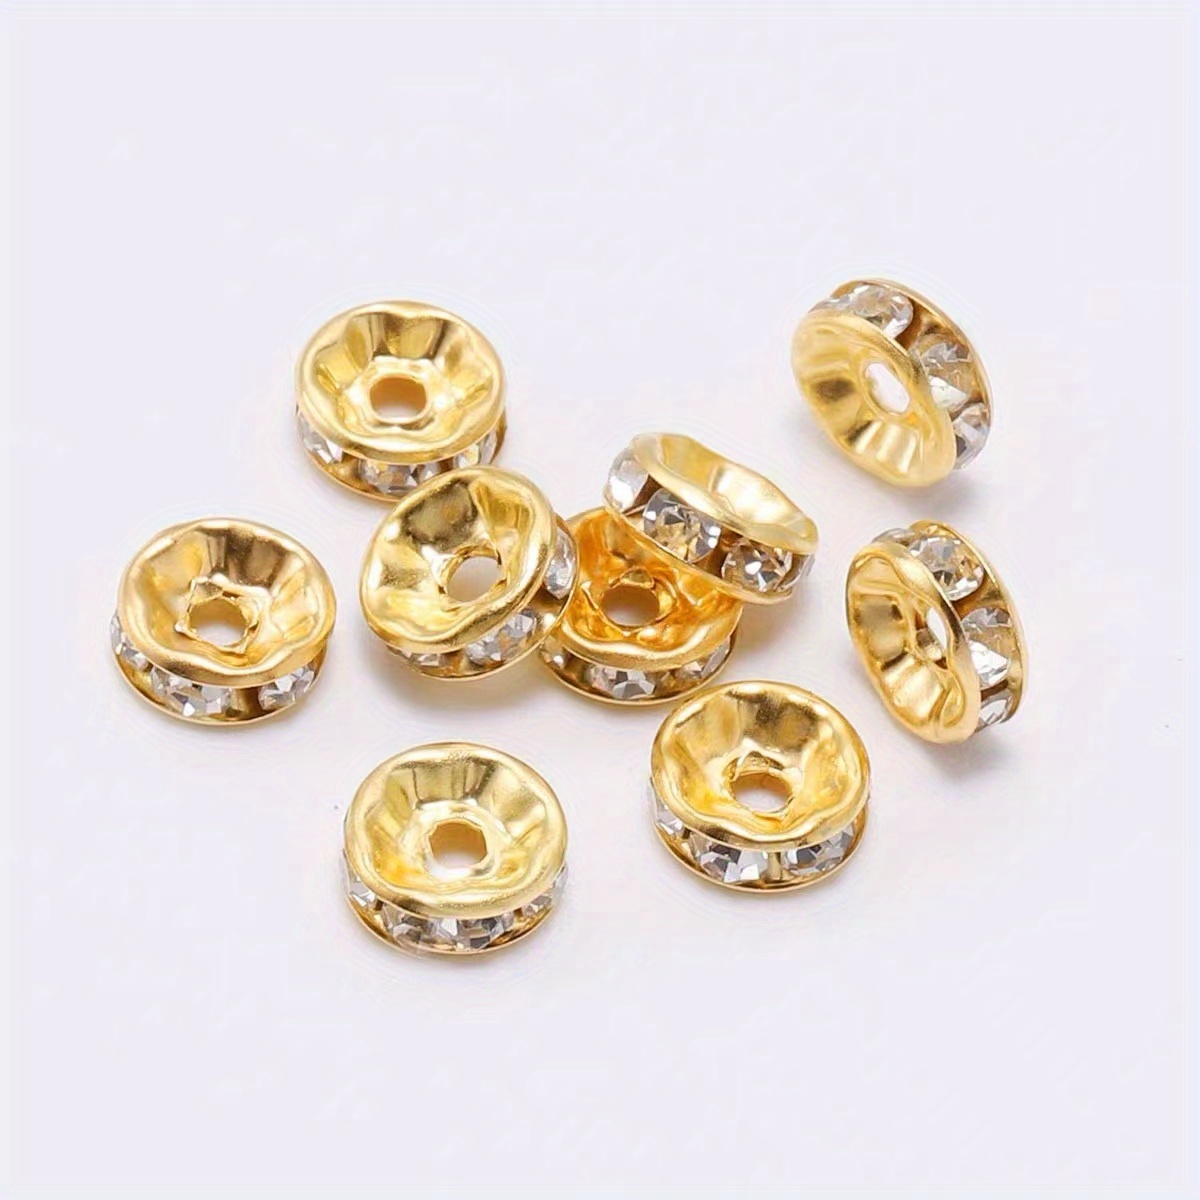 Cludoo Rondelle Spacer Beads for Jewelry Making 1200 pcs 8mm